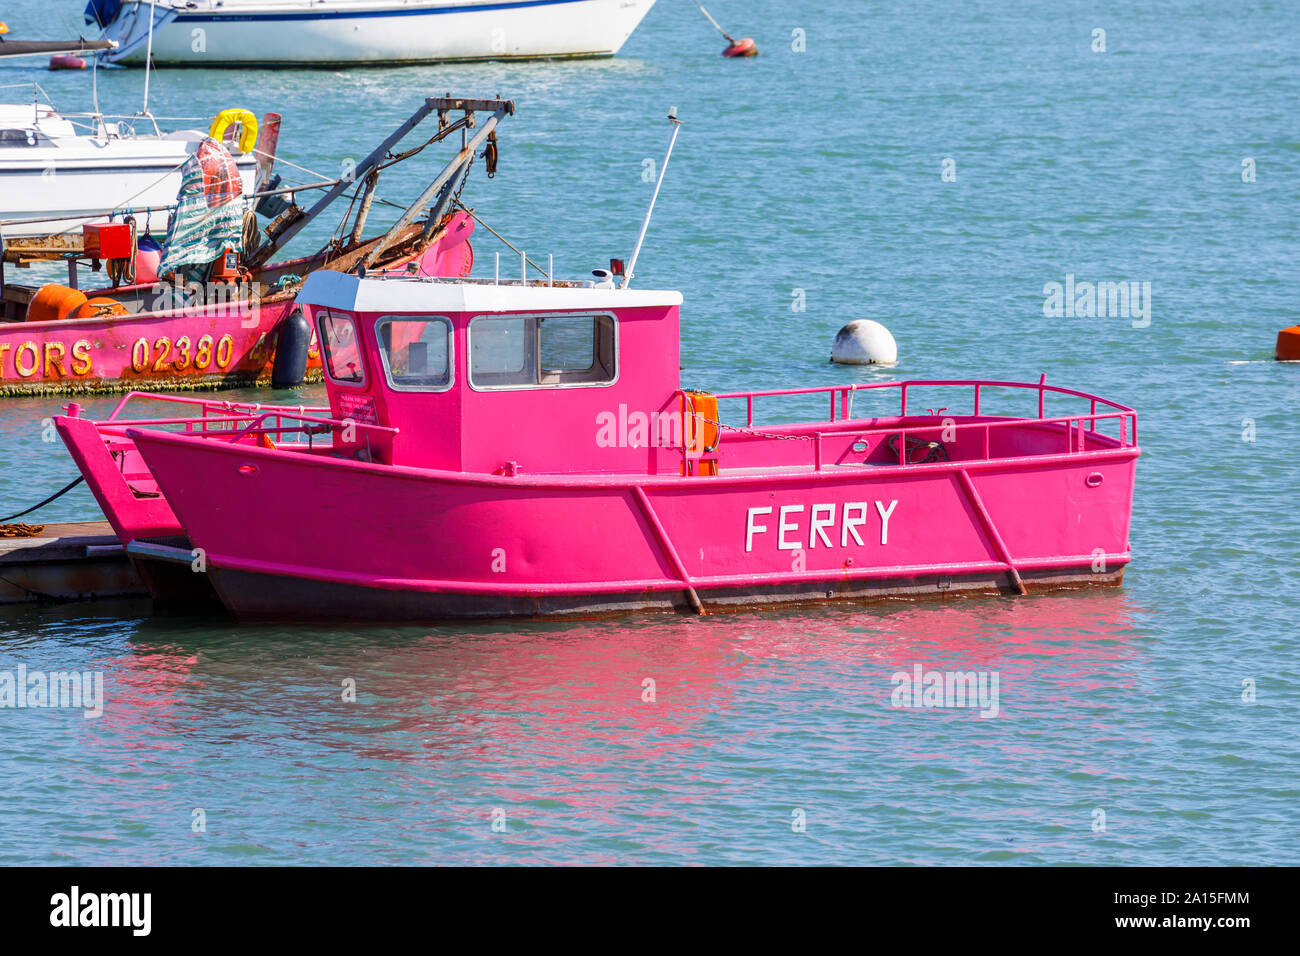 The small bright pink livery vintage Hamble to Warsash passenger ferry which crosses the River Hamble as it joins the Solent, south coast England, UK Stock Photo